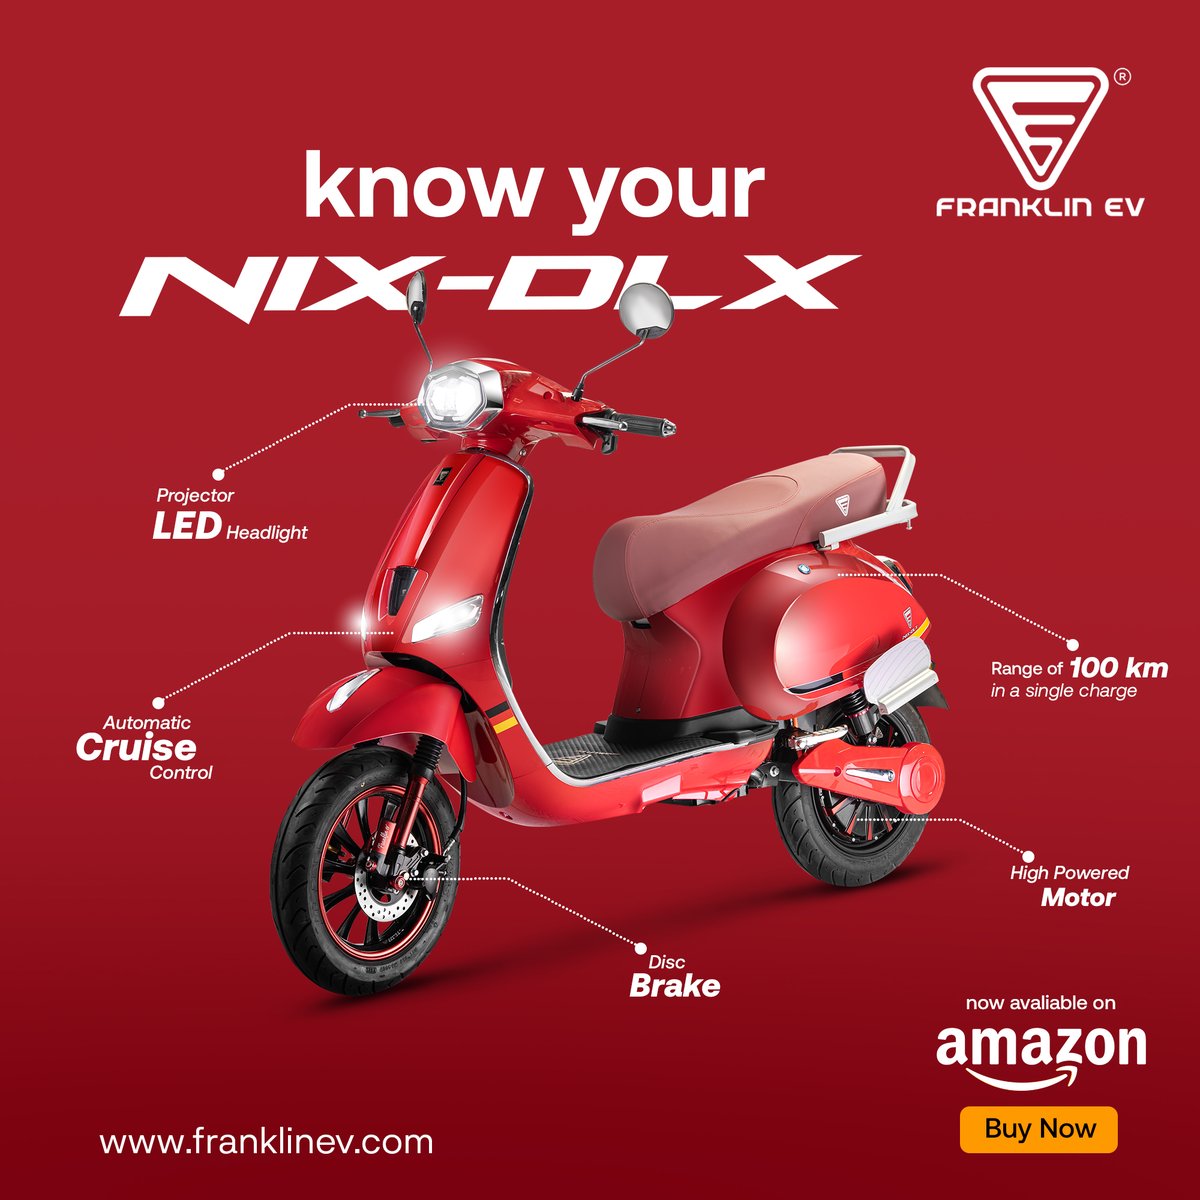 Join the movement, ride electric, and be the change! ⚡🌟 

Now Available on Amazon Get Exciting Offers 

franklinev #CleanCommute #ScooterSavings #GoGreen #SustainableLiving #RideGreen #SaveGreen